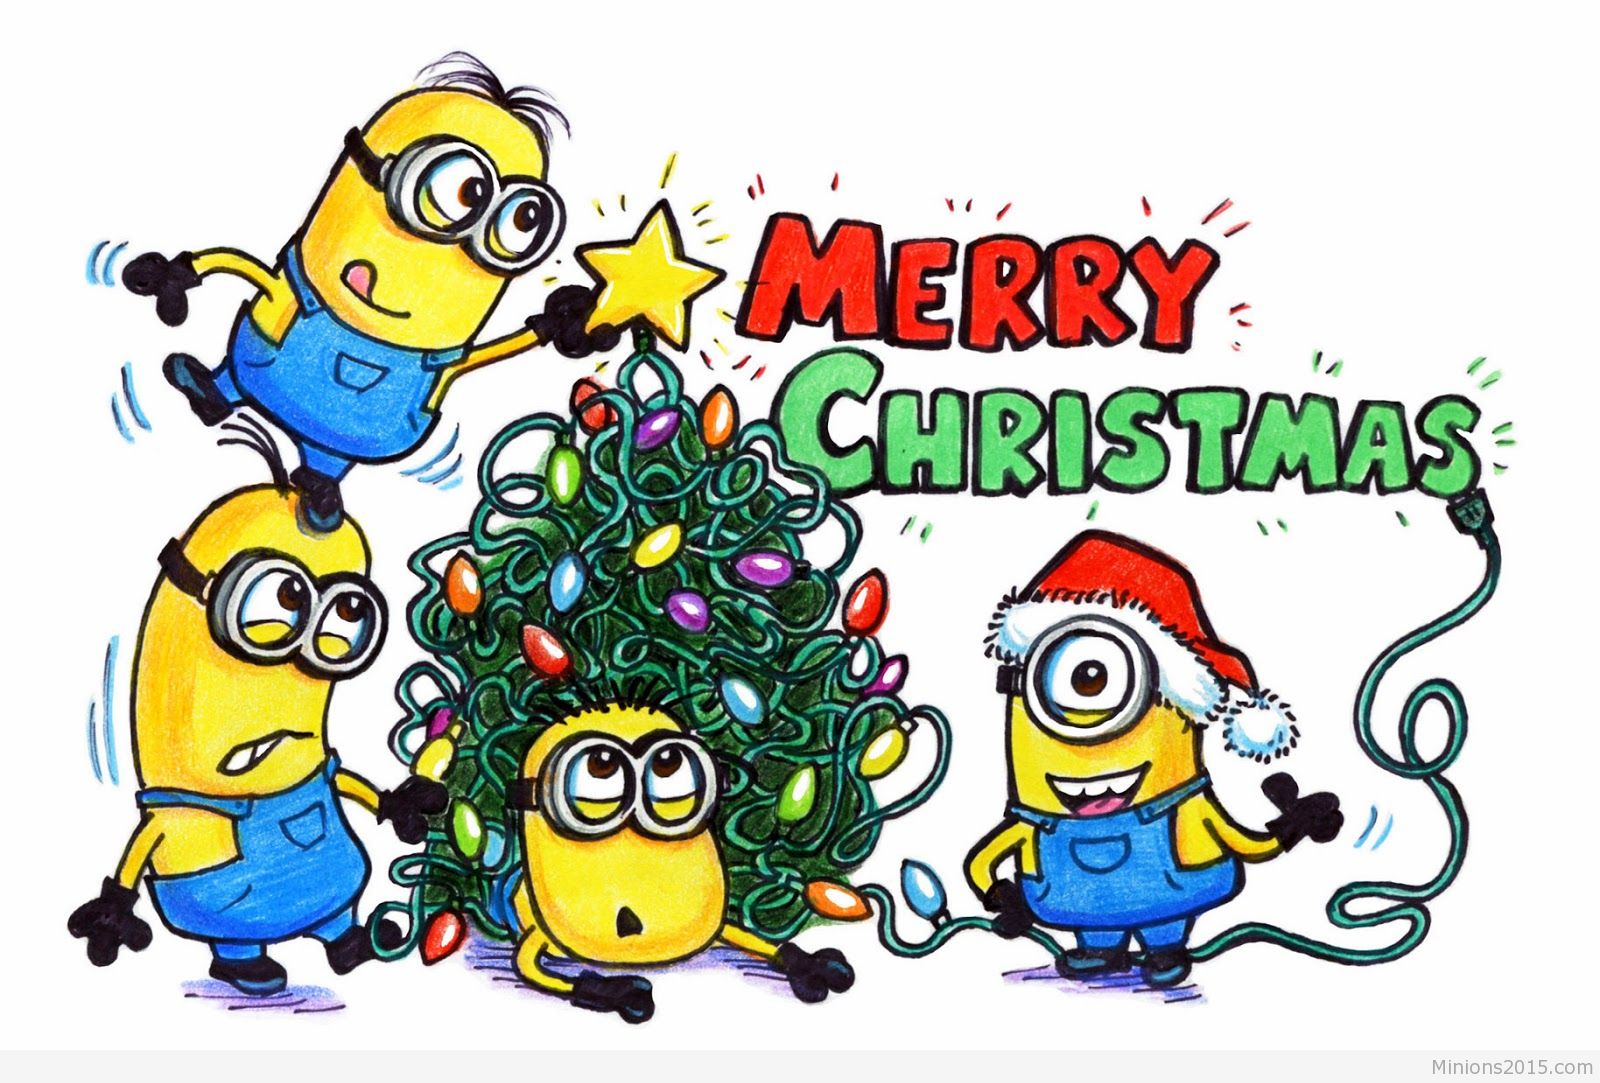 merry christmas wishes minions - Clip Art Library